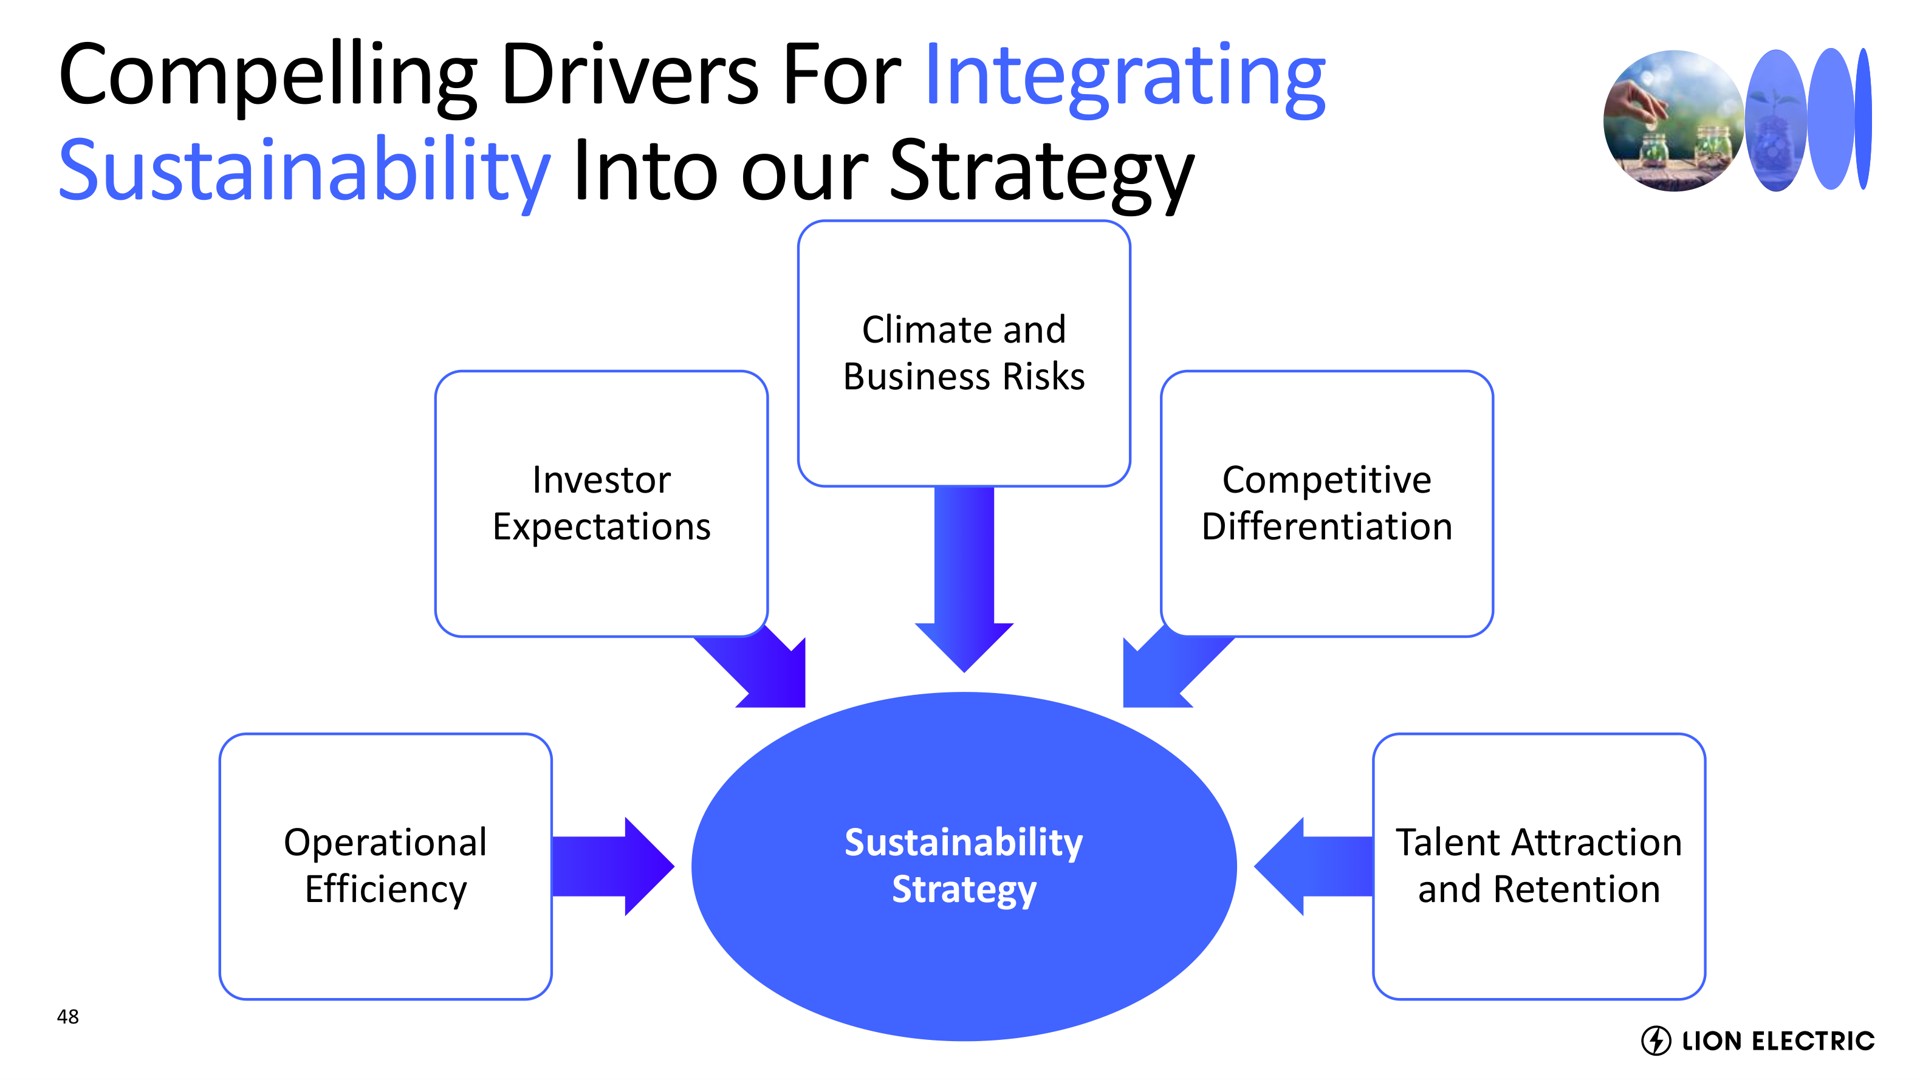 compelling drivers for integrating into our strategy | Lion Electric